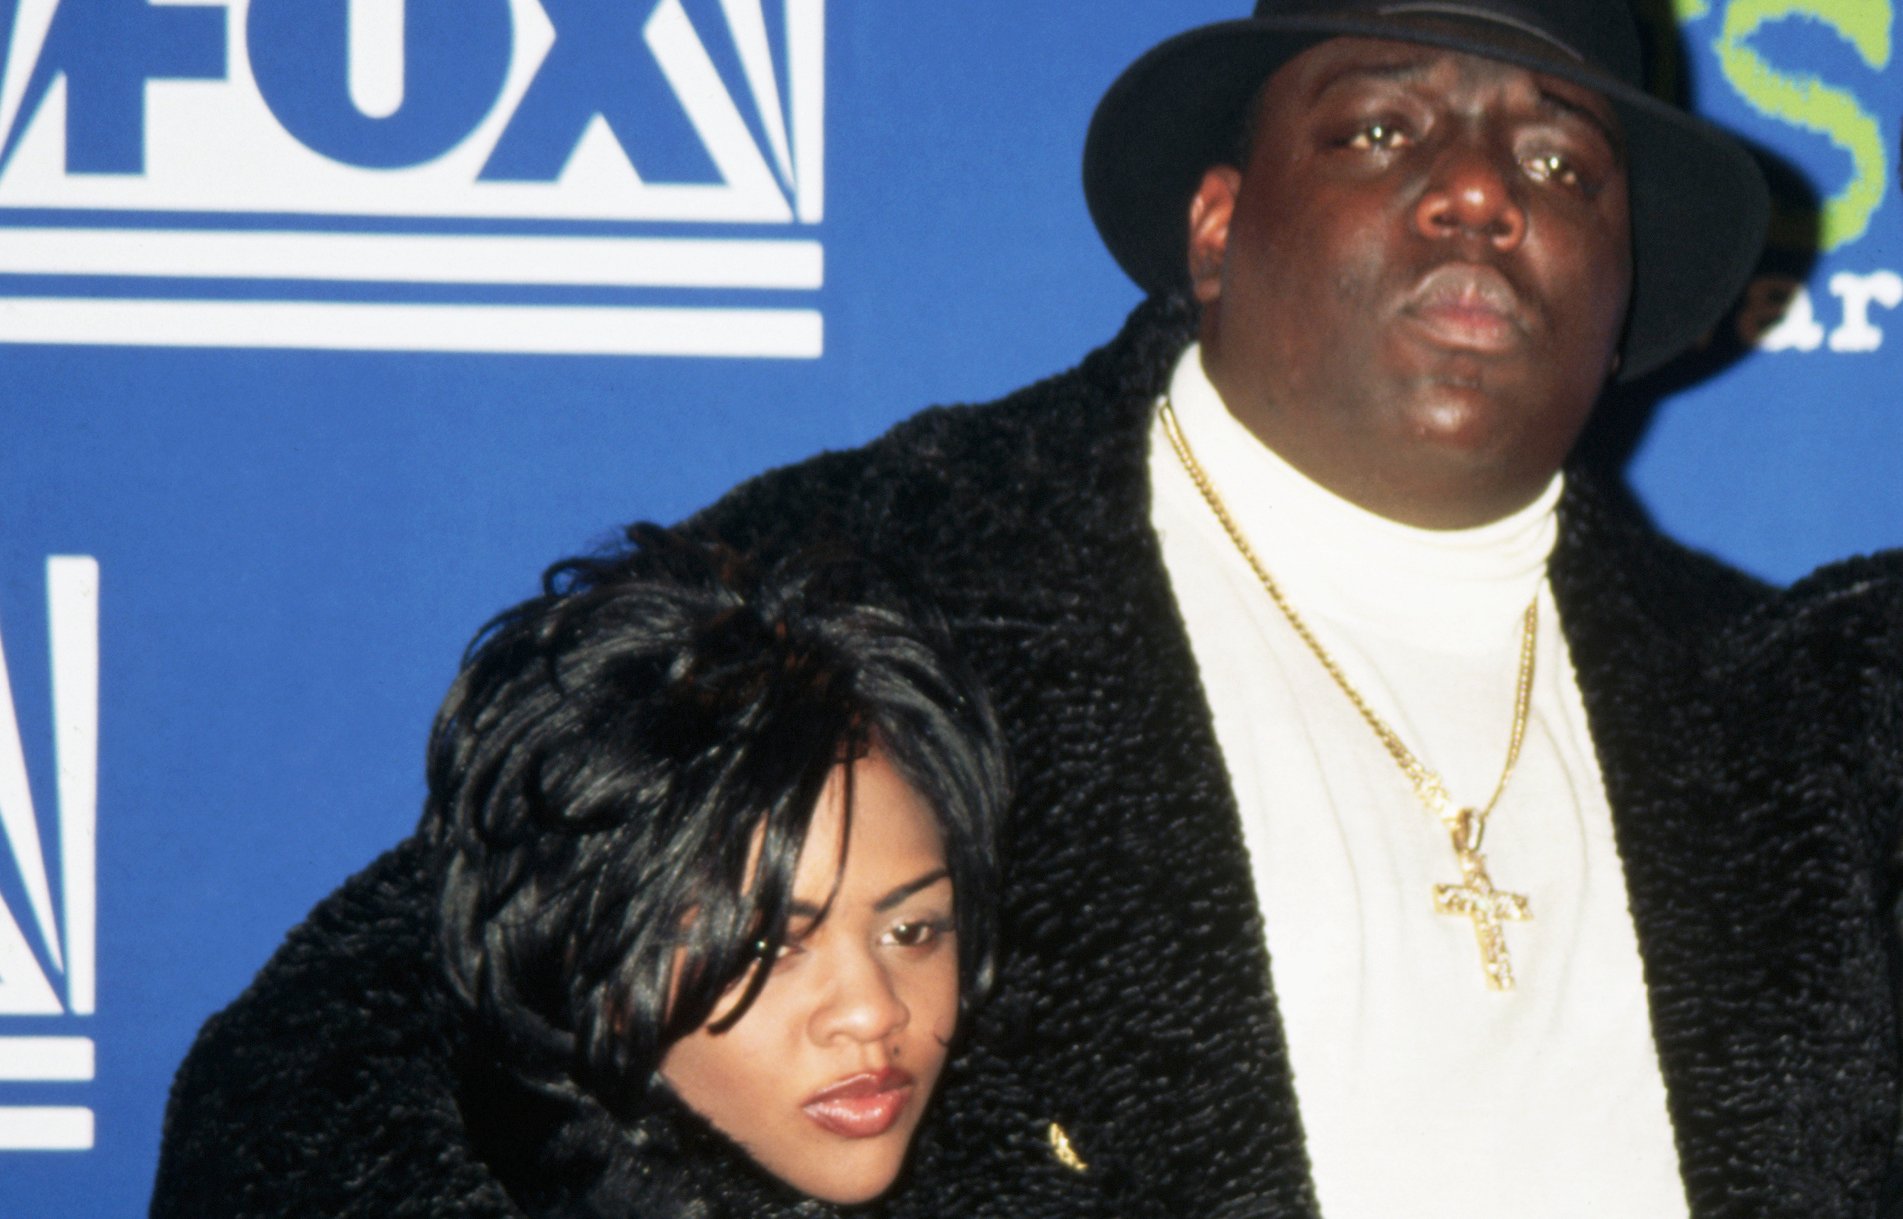 Lil' Kim and The Notorious B.I.G. on the red carpet